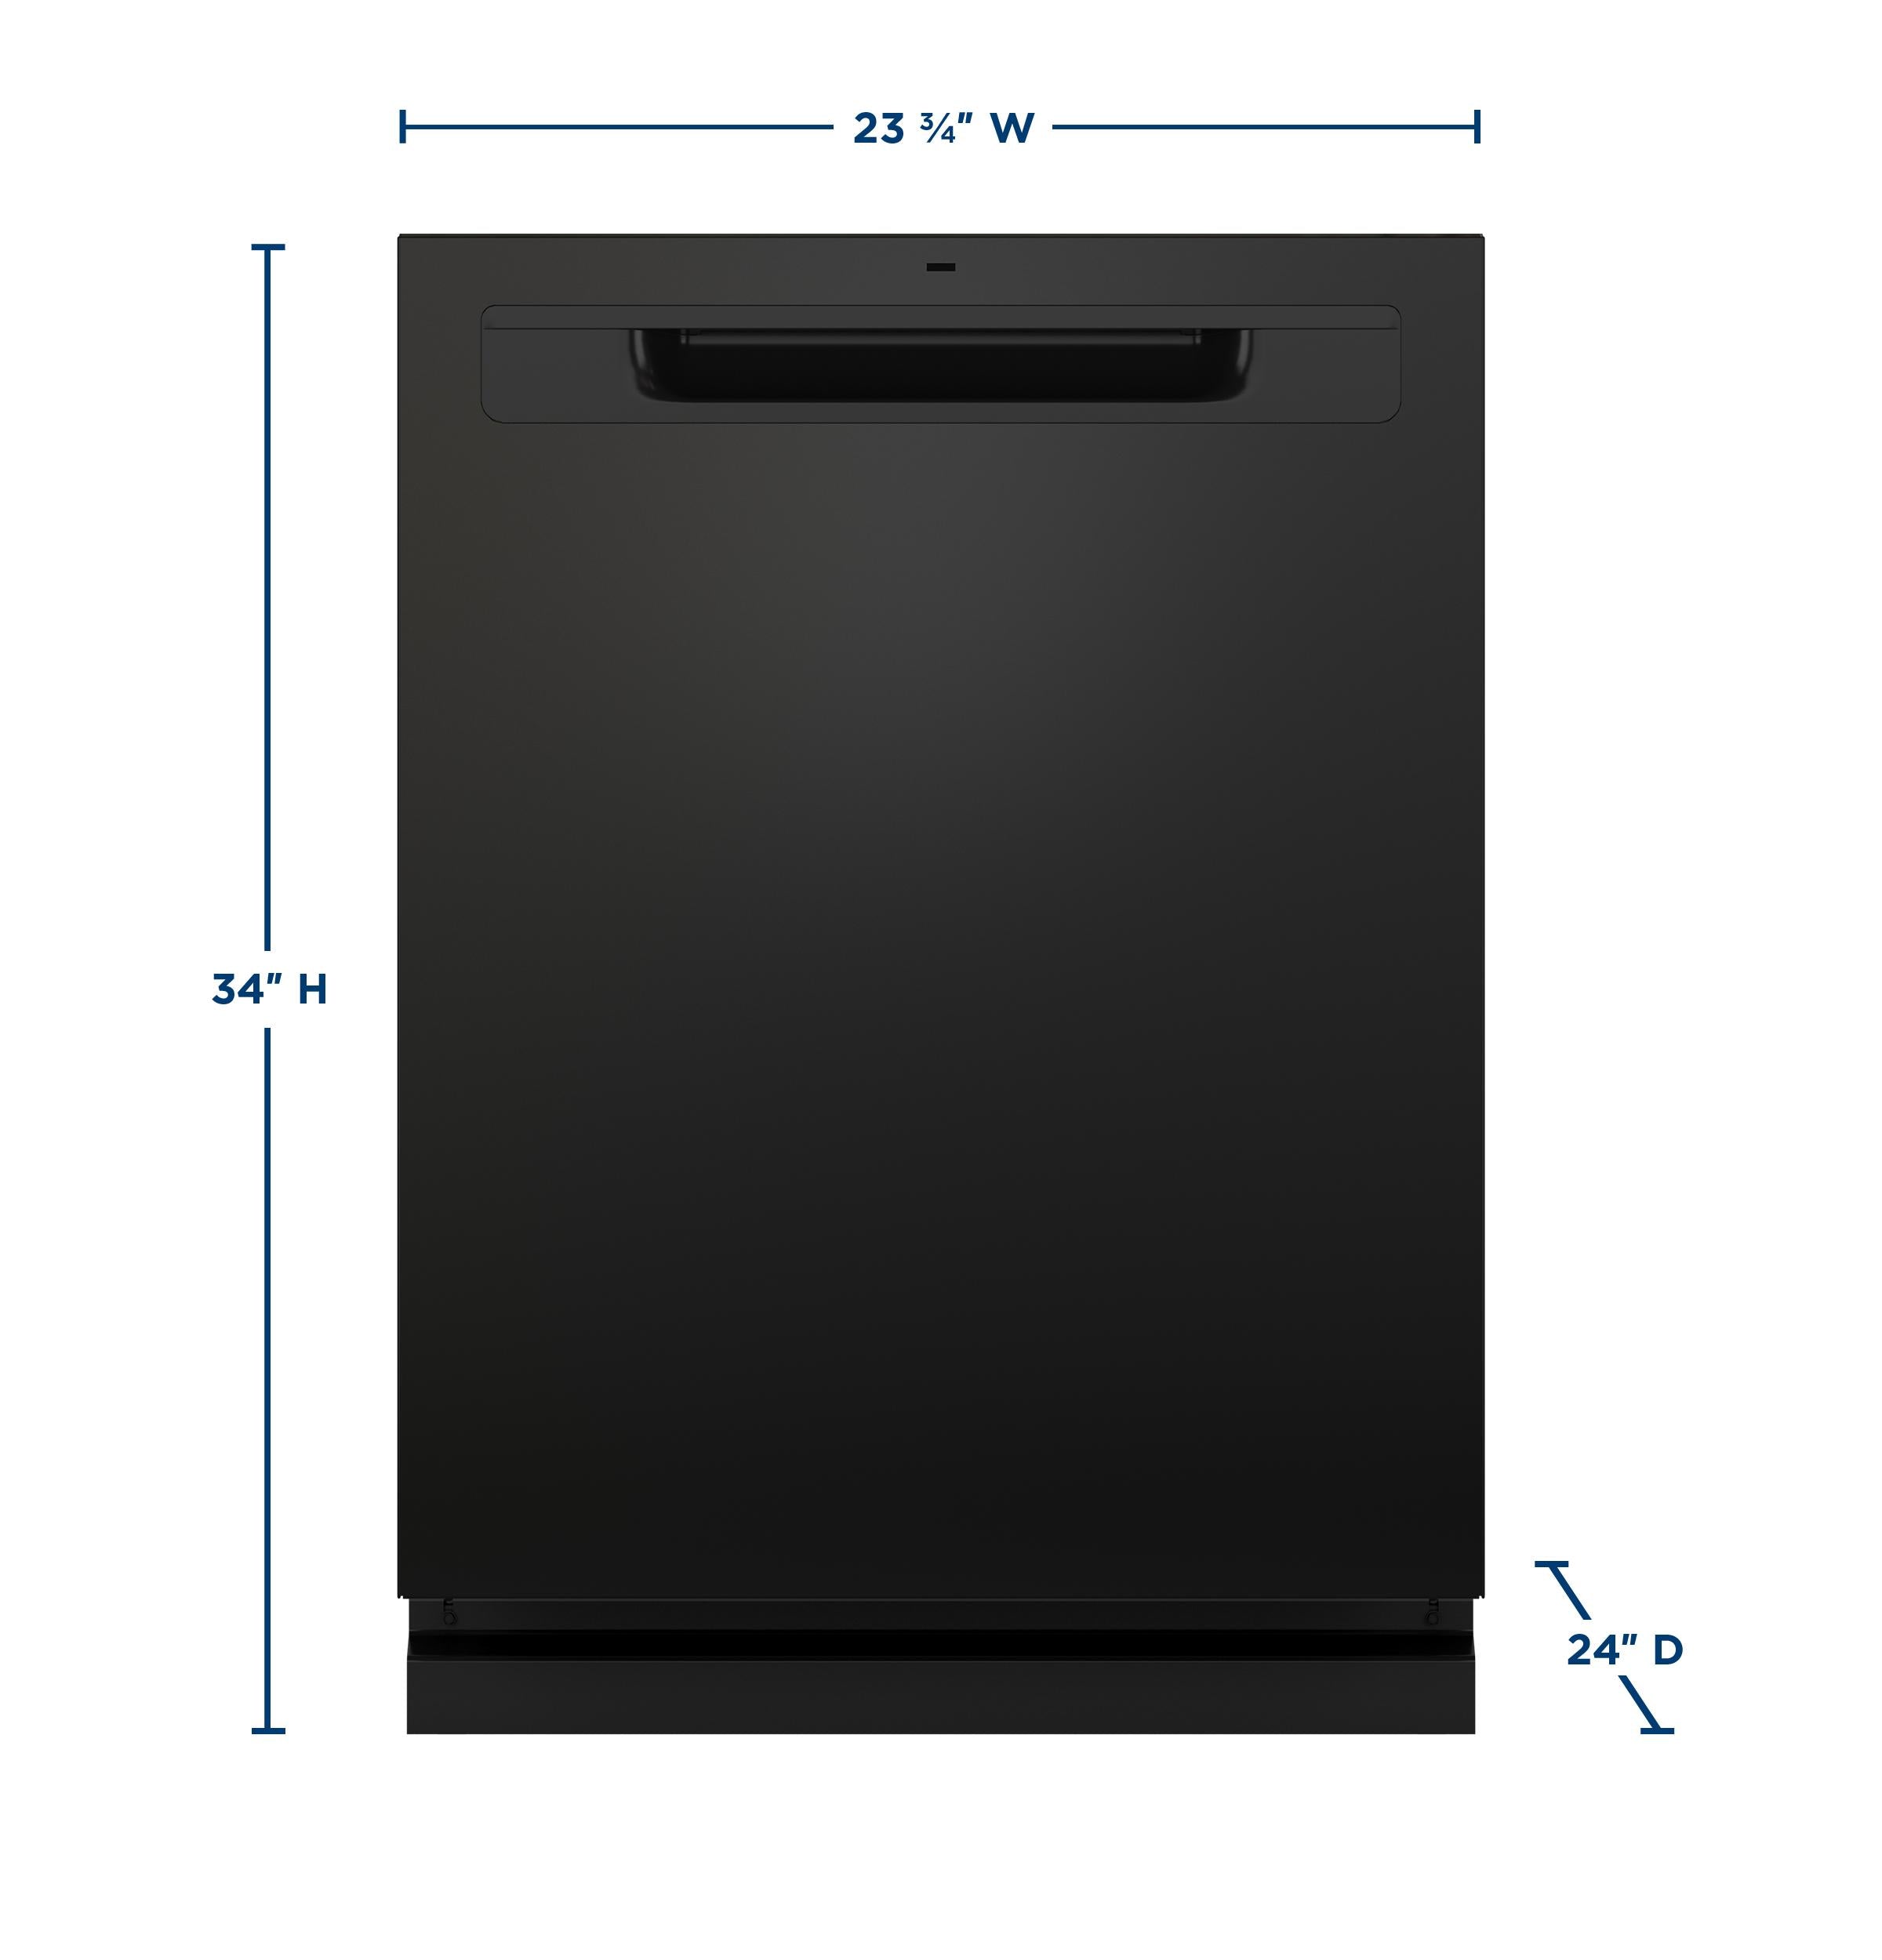 GE® ENERGY STAR® Top Control with Stainless Steel Interior Dishwasher with Sanitize Cycle